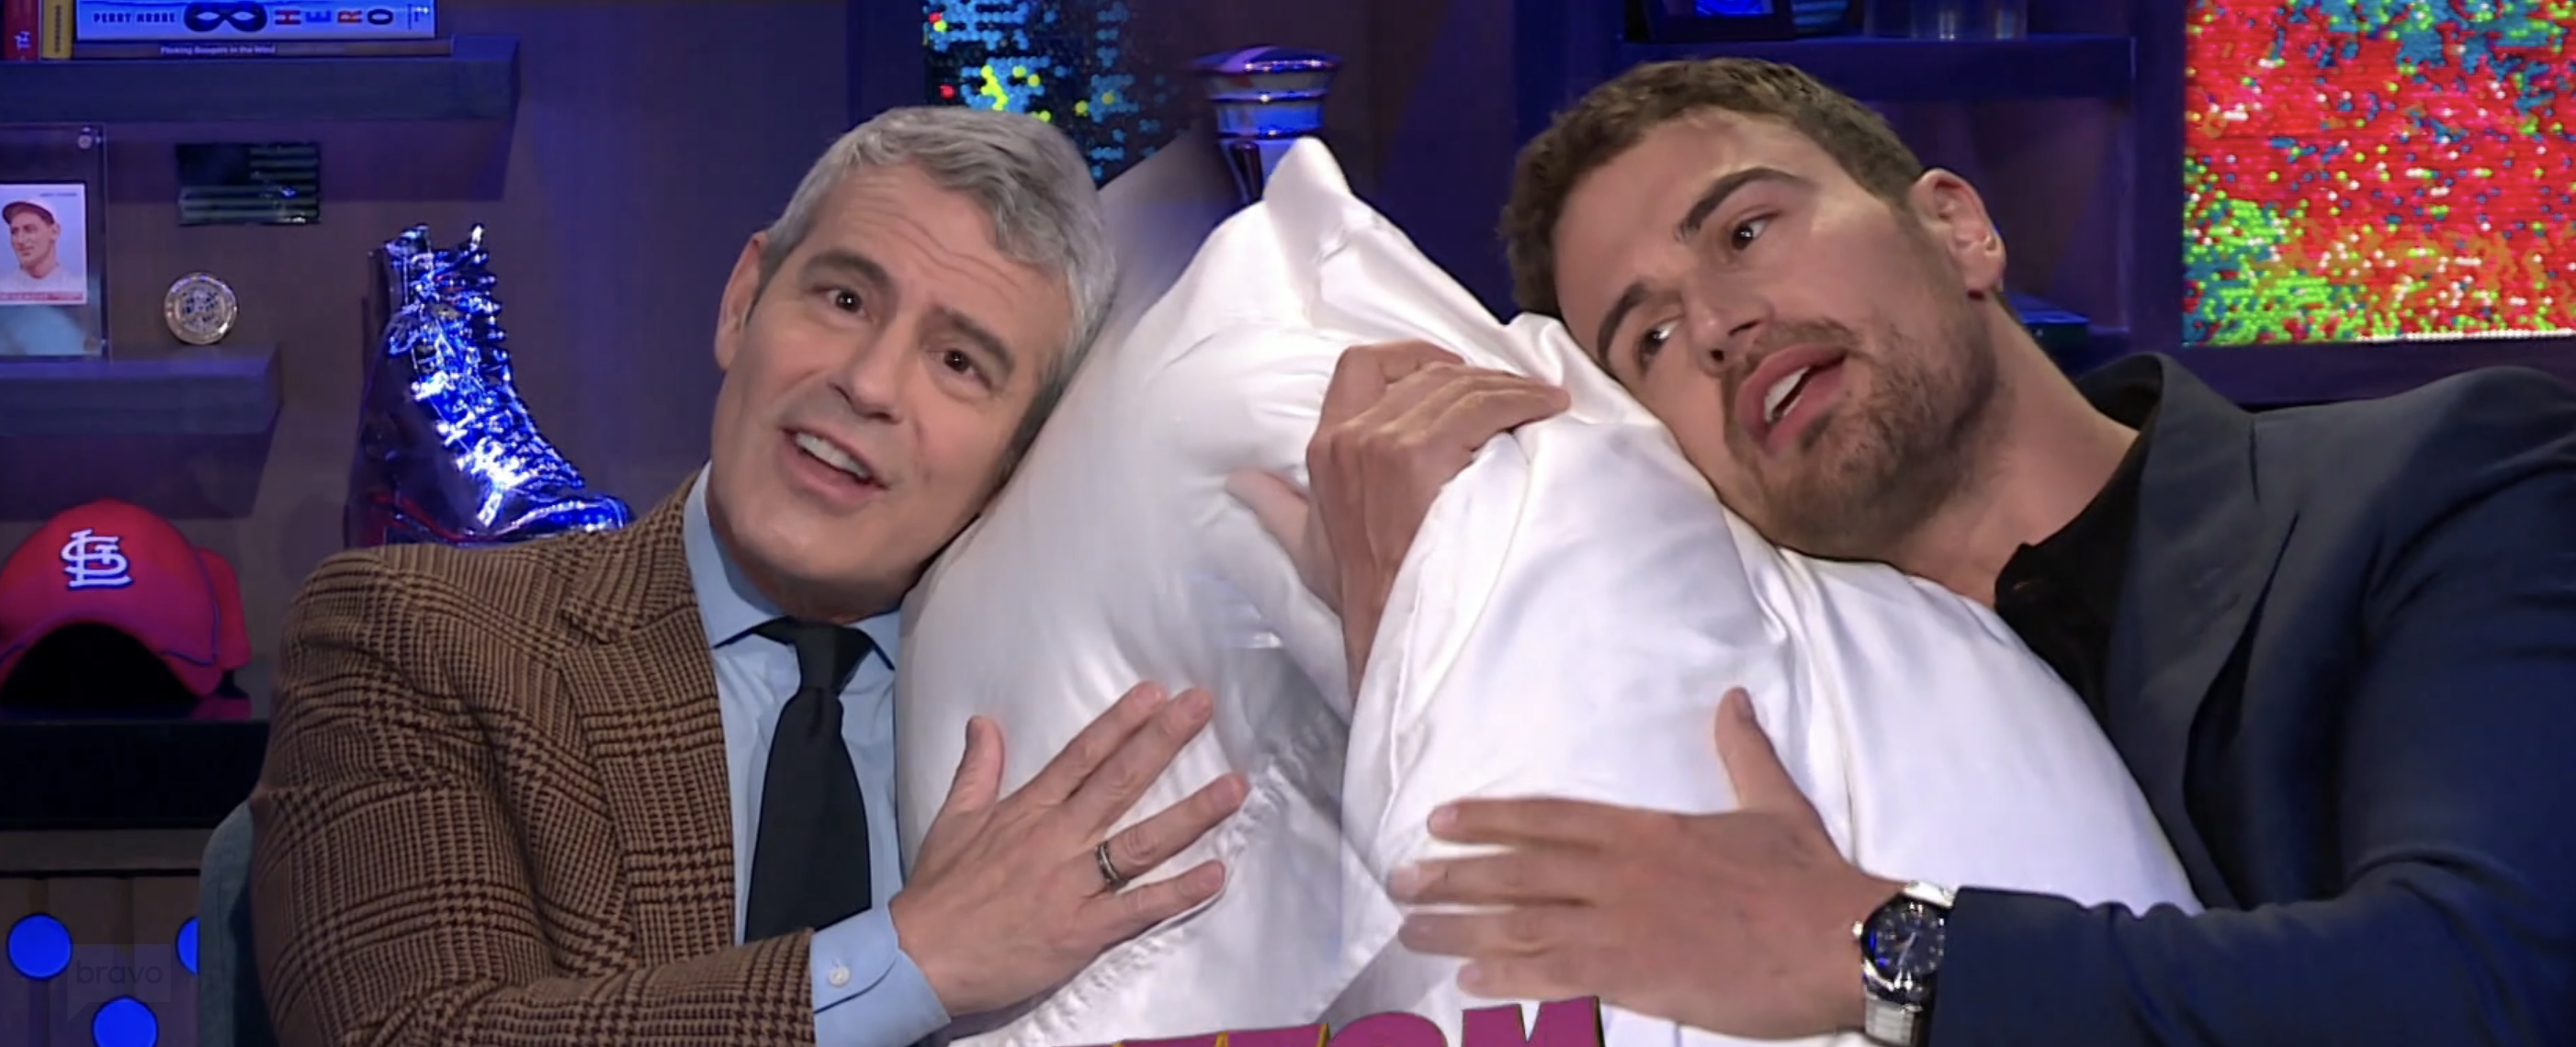 andy cohen and theo with pillows